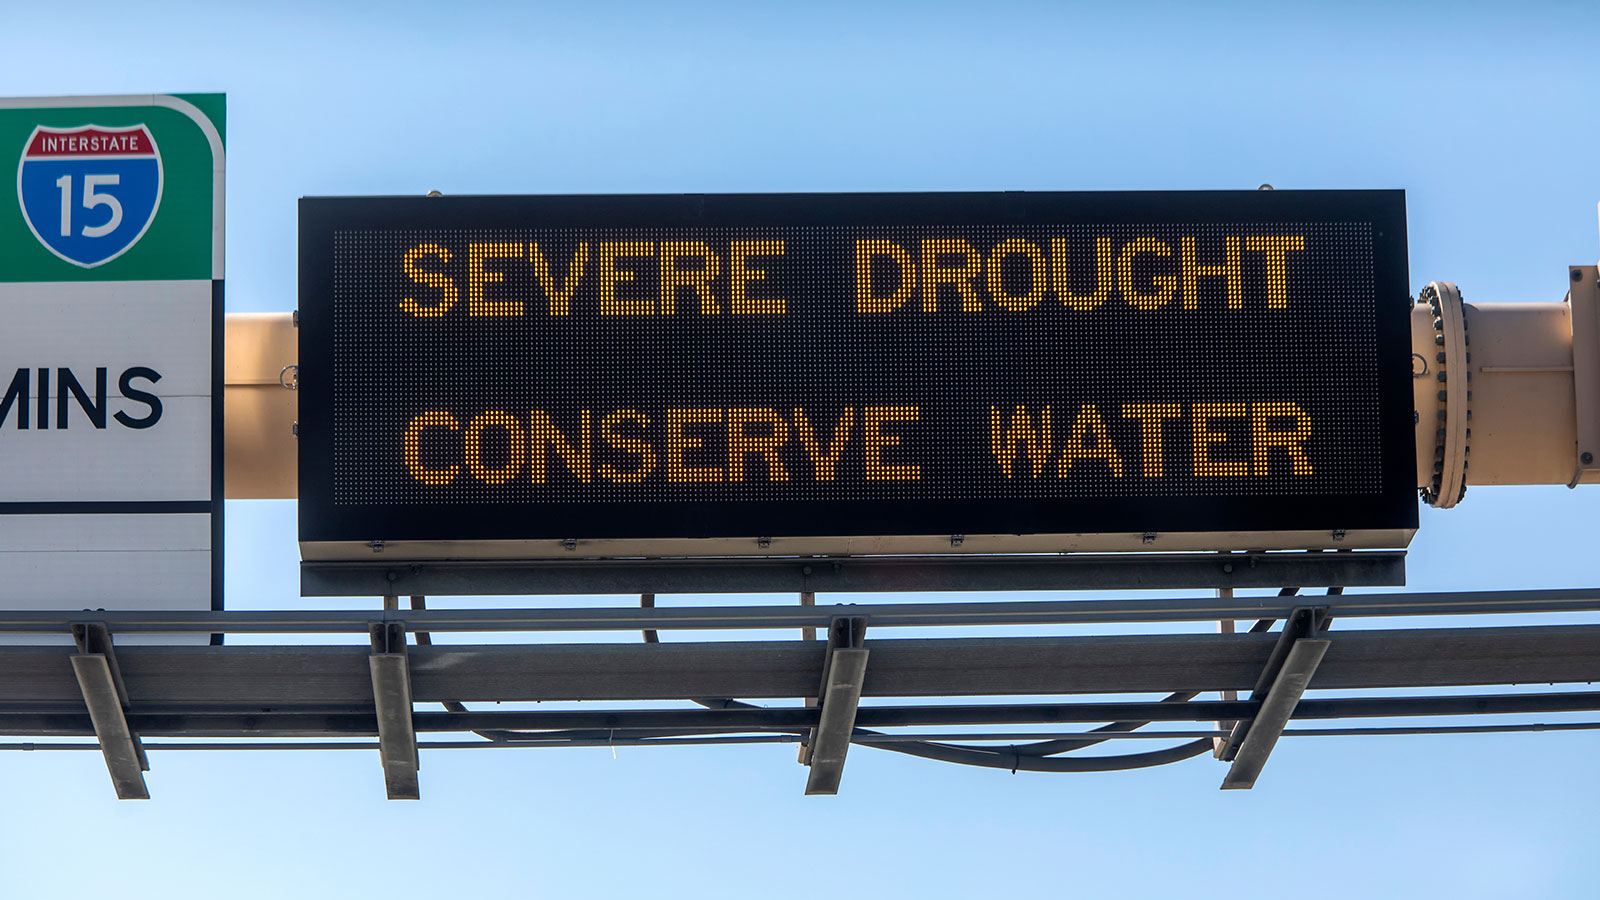 Freeway sign warning of severe drought